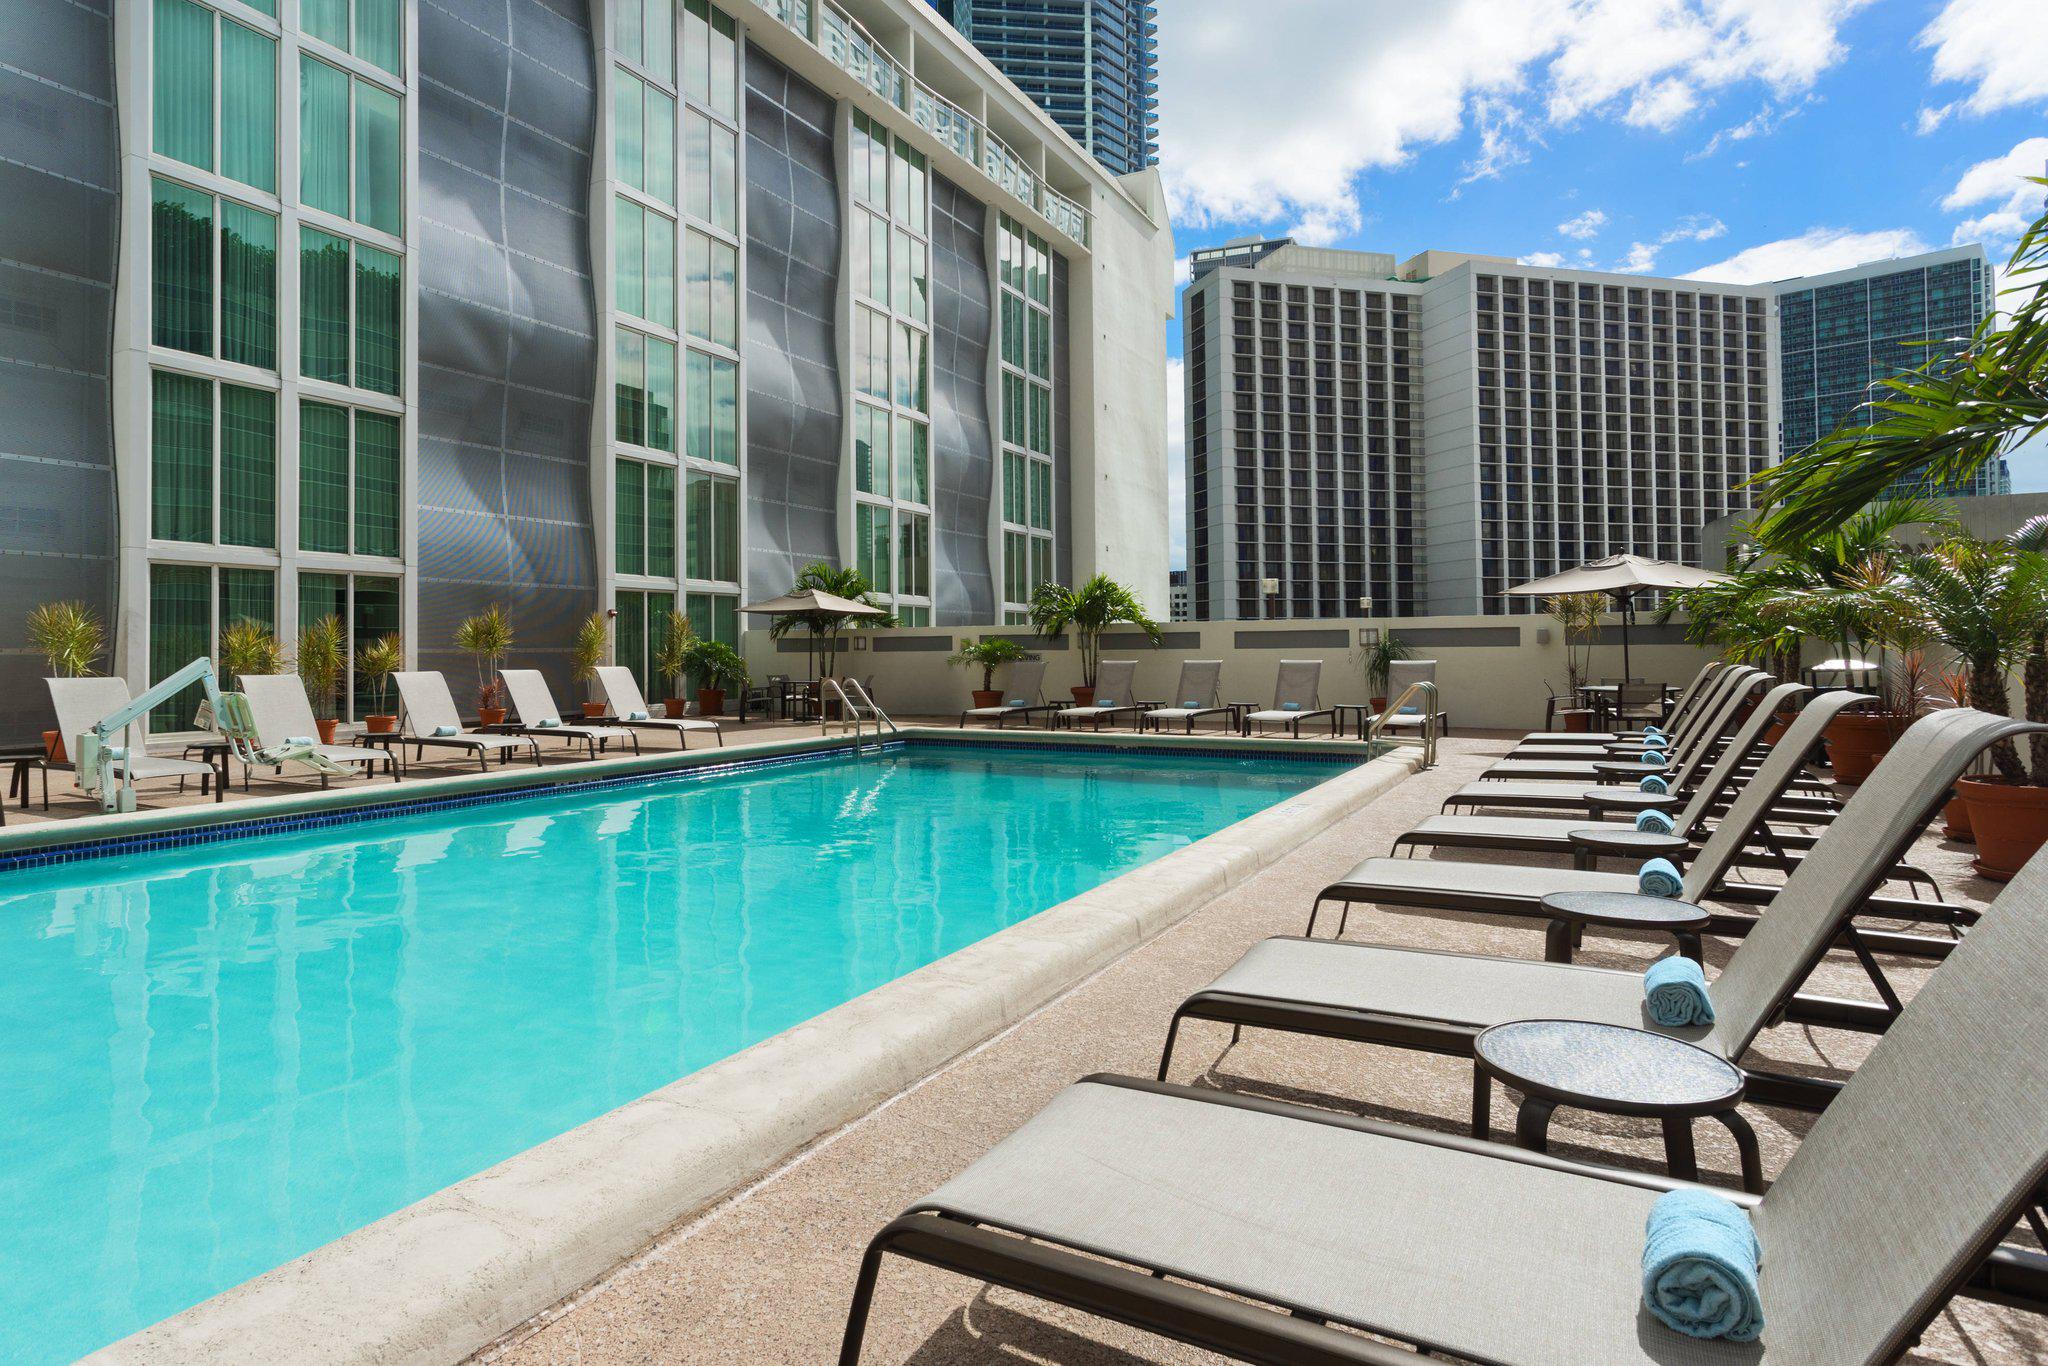 Courtyard by Marriott Miami Downtown/Brickell Area Photo